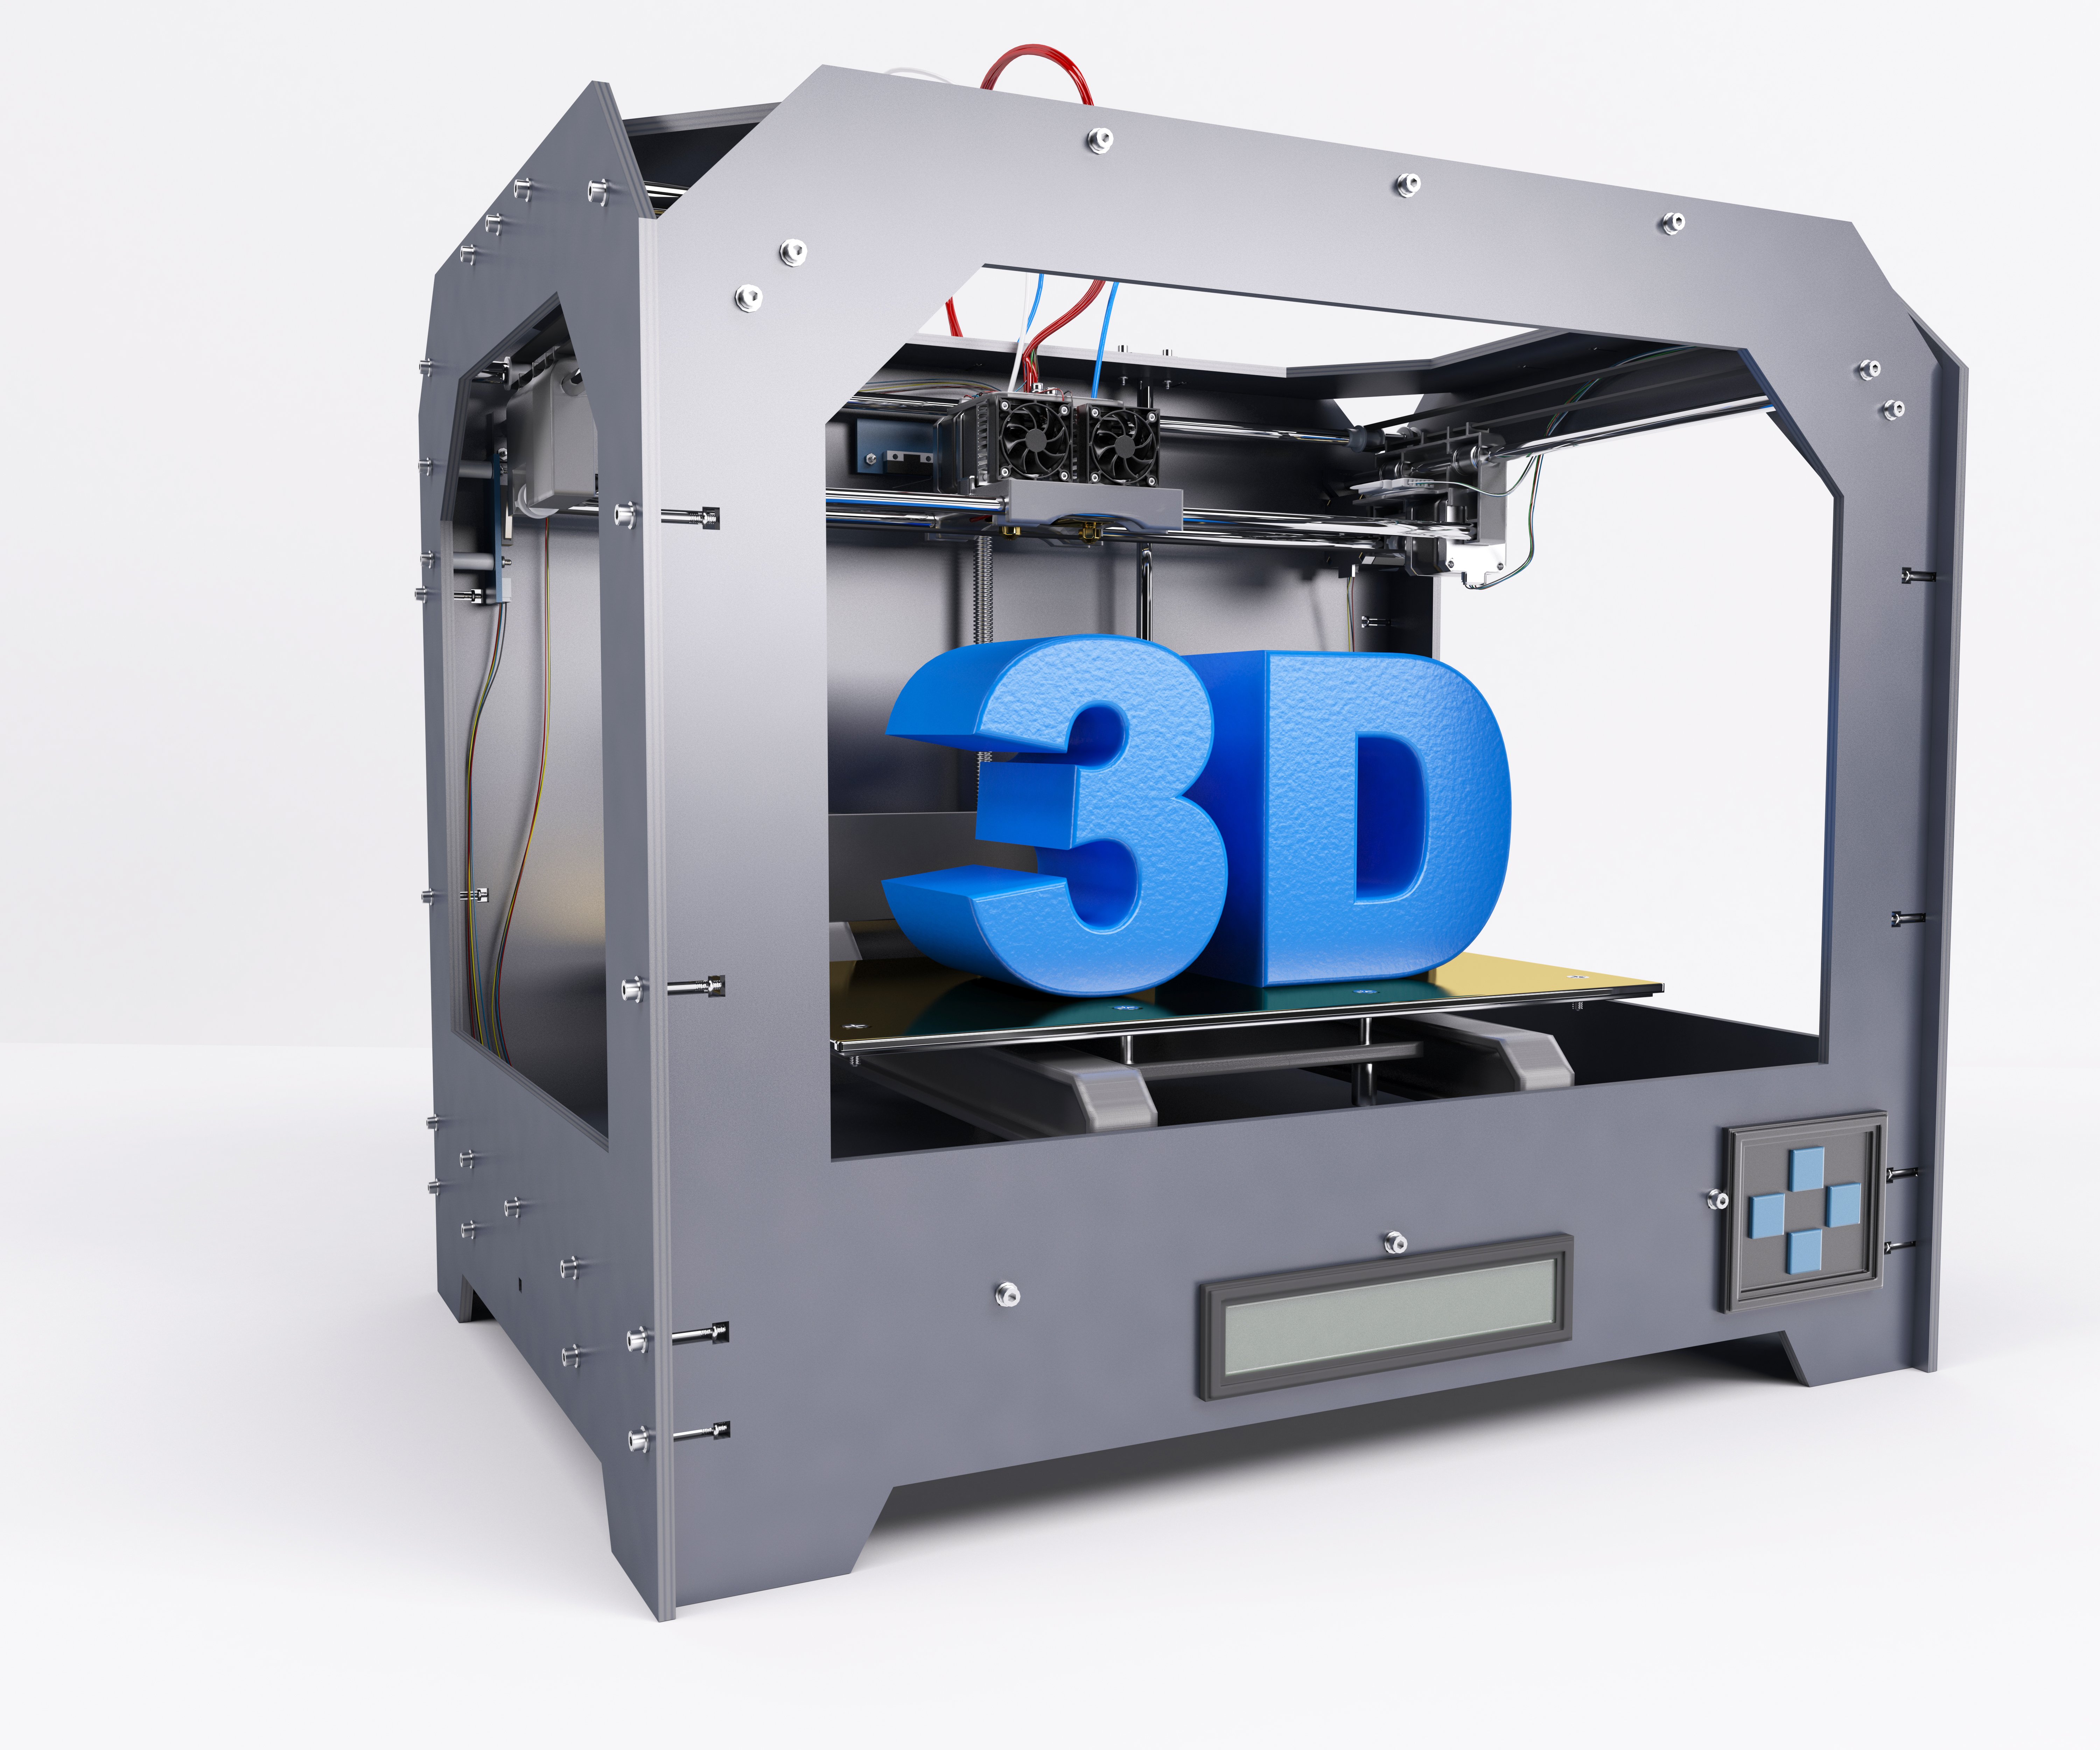 3D Printing: The Benefits Add Up Image